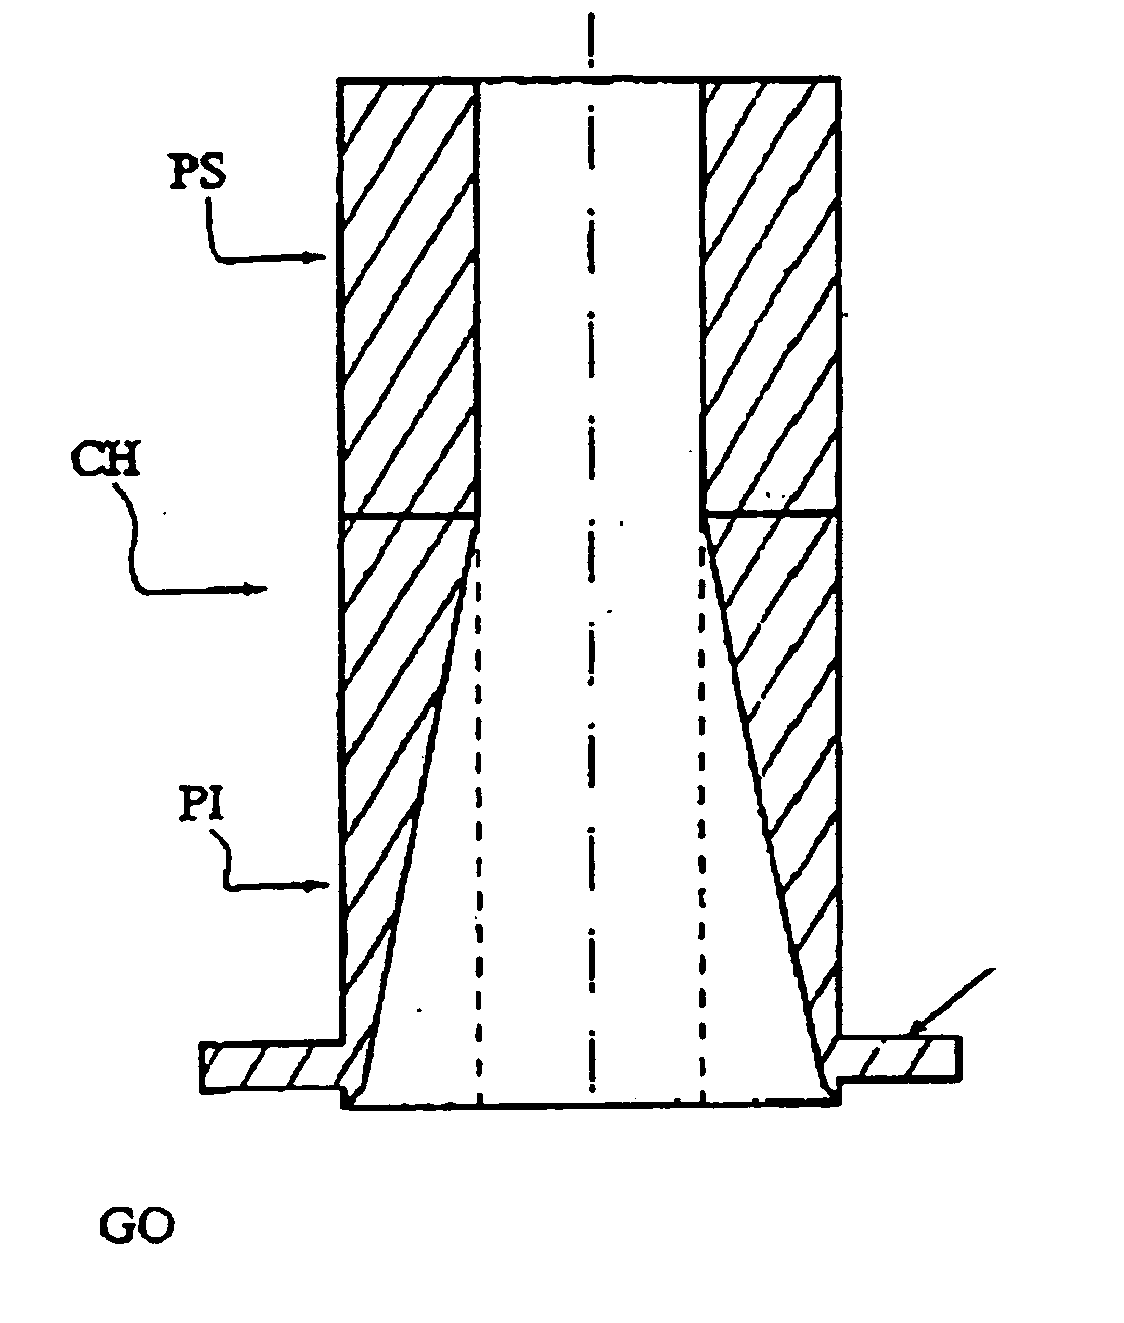 Energy applicators adapted to dielectric heating